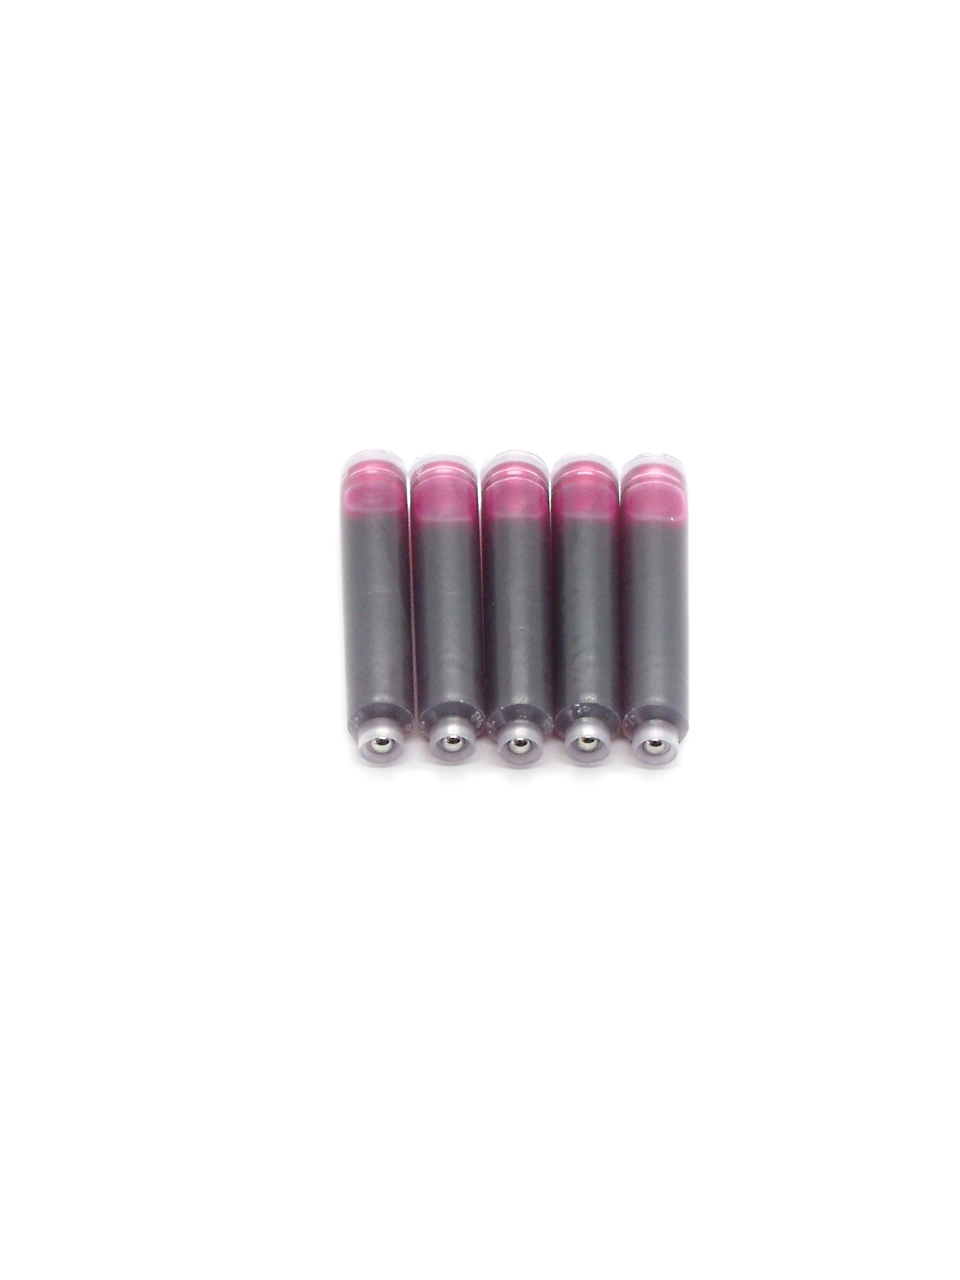 Top Ink Cartridges For Montblanc Fountain Pens (Pink)